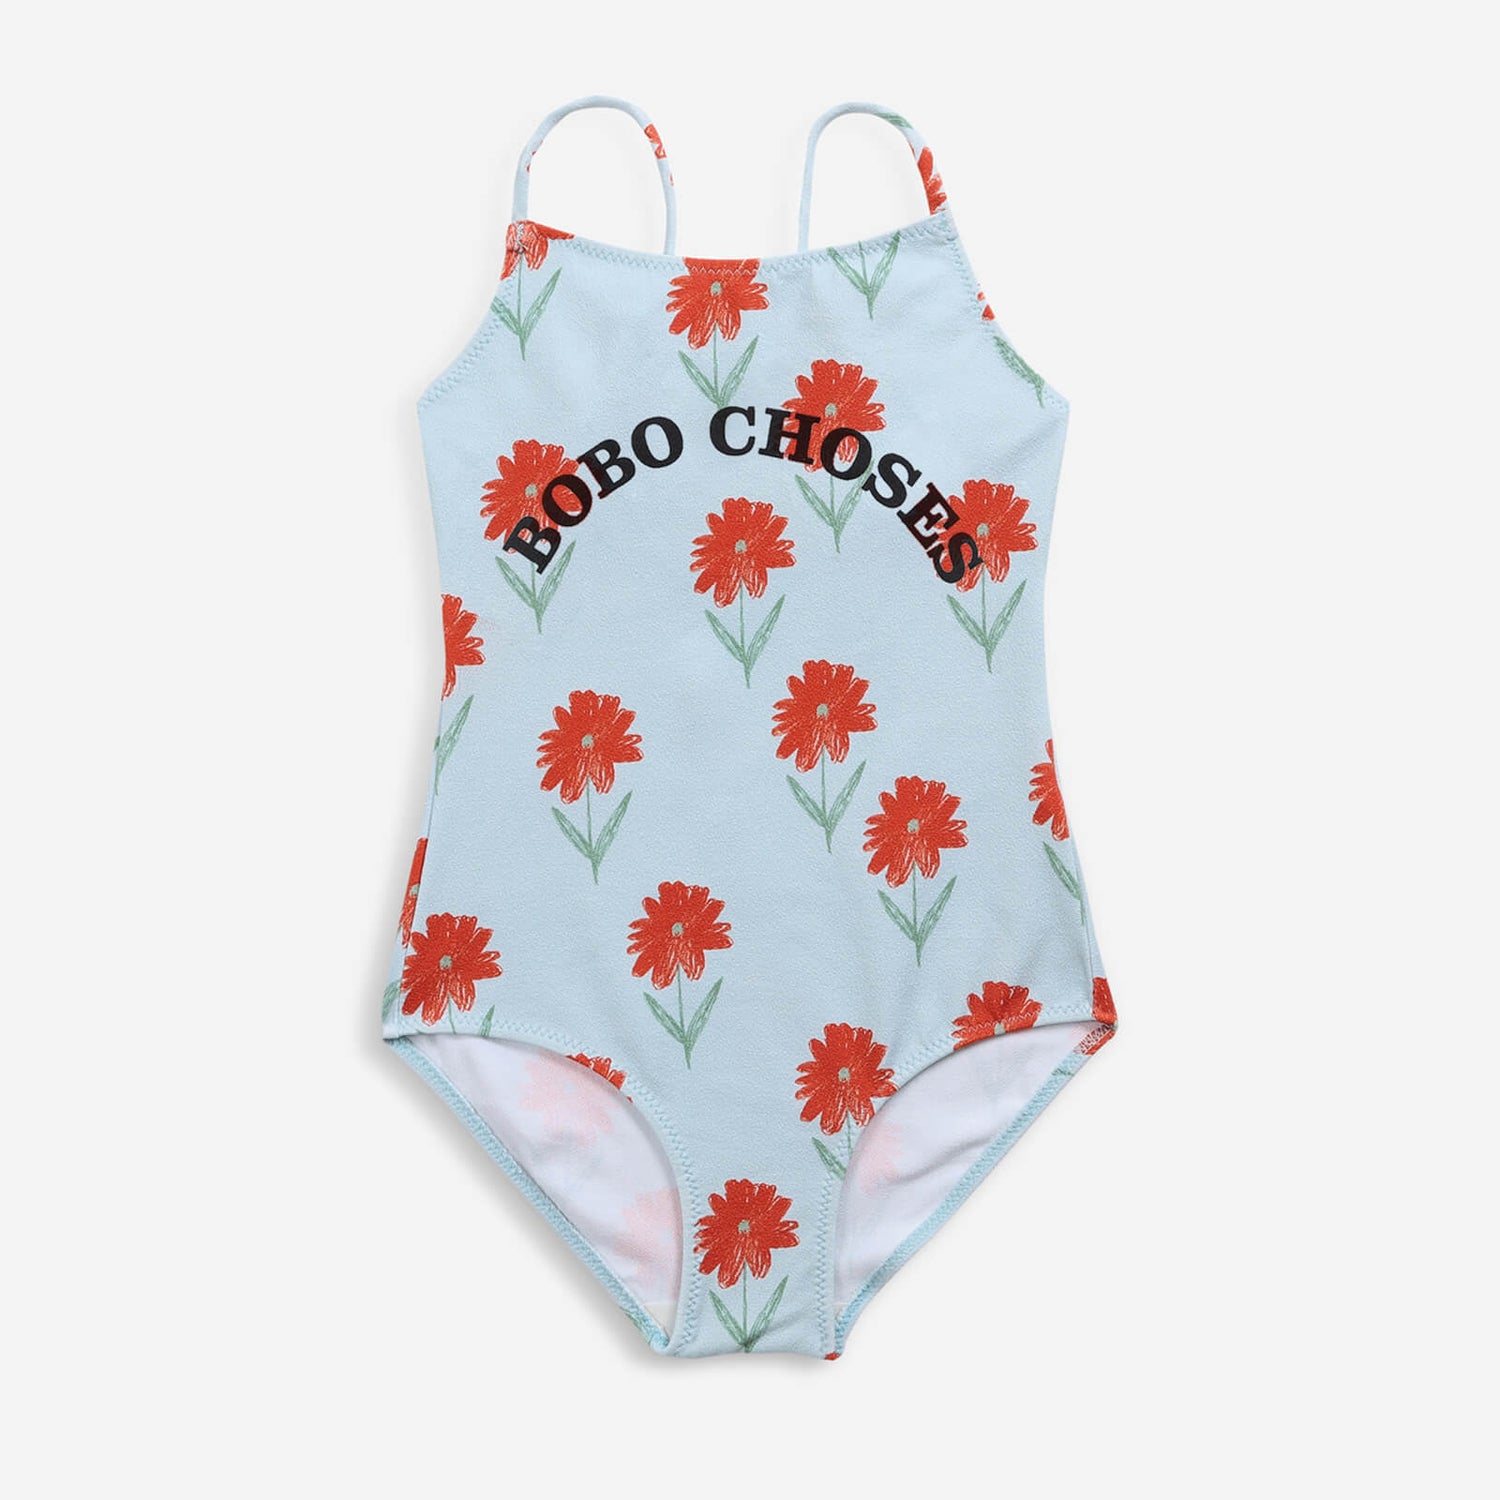 BoBo Choses Kids' Petunia All Over Swimsuit - 2-3 years